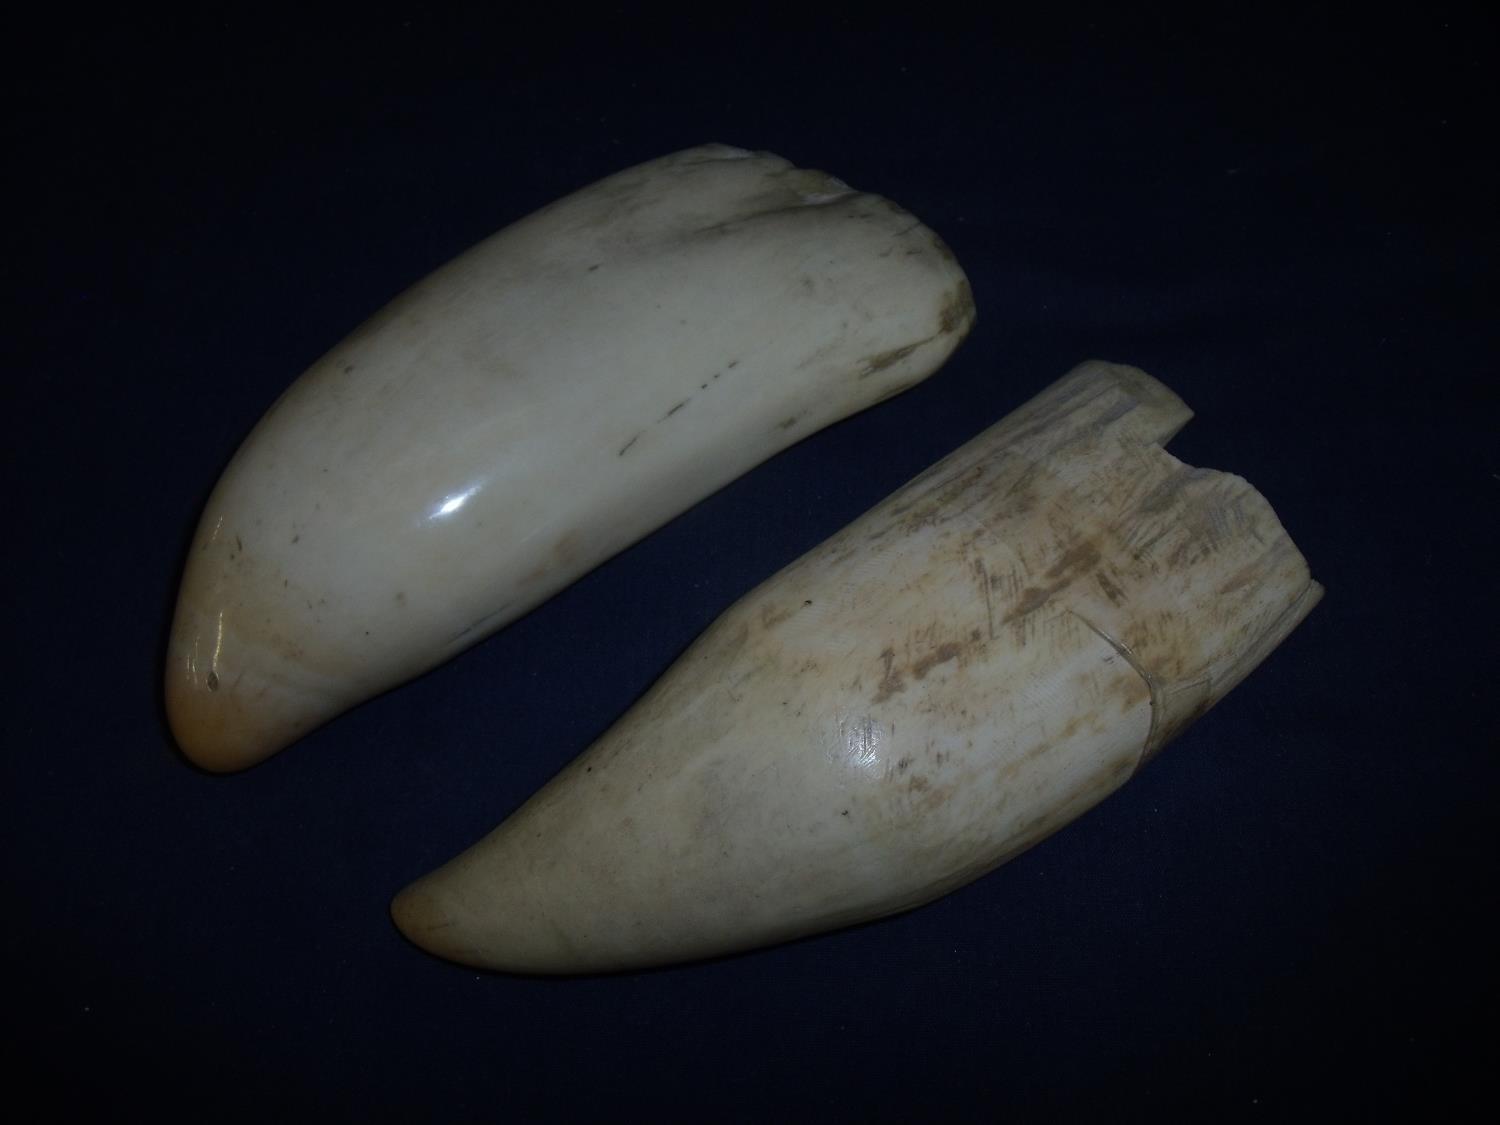 Extremely large whales tooth (overall length 7 1/2 inches) and another similar